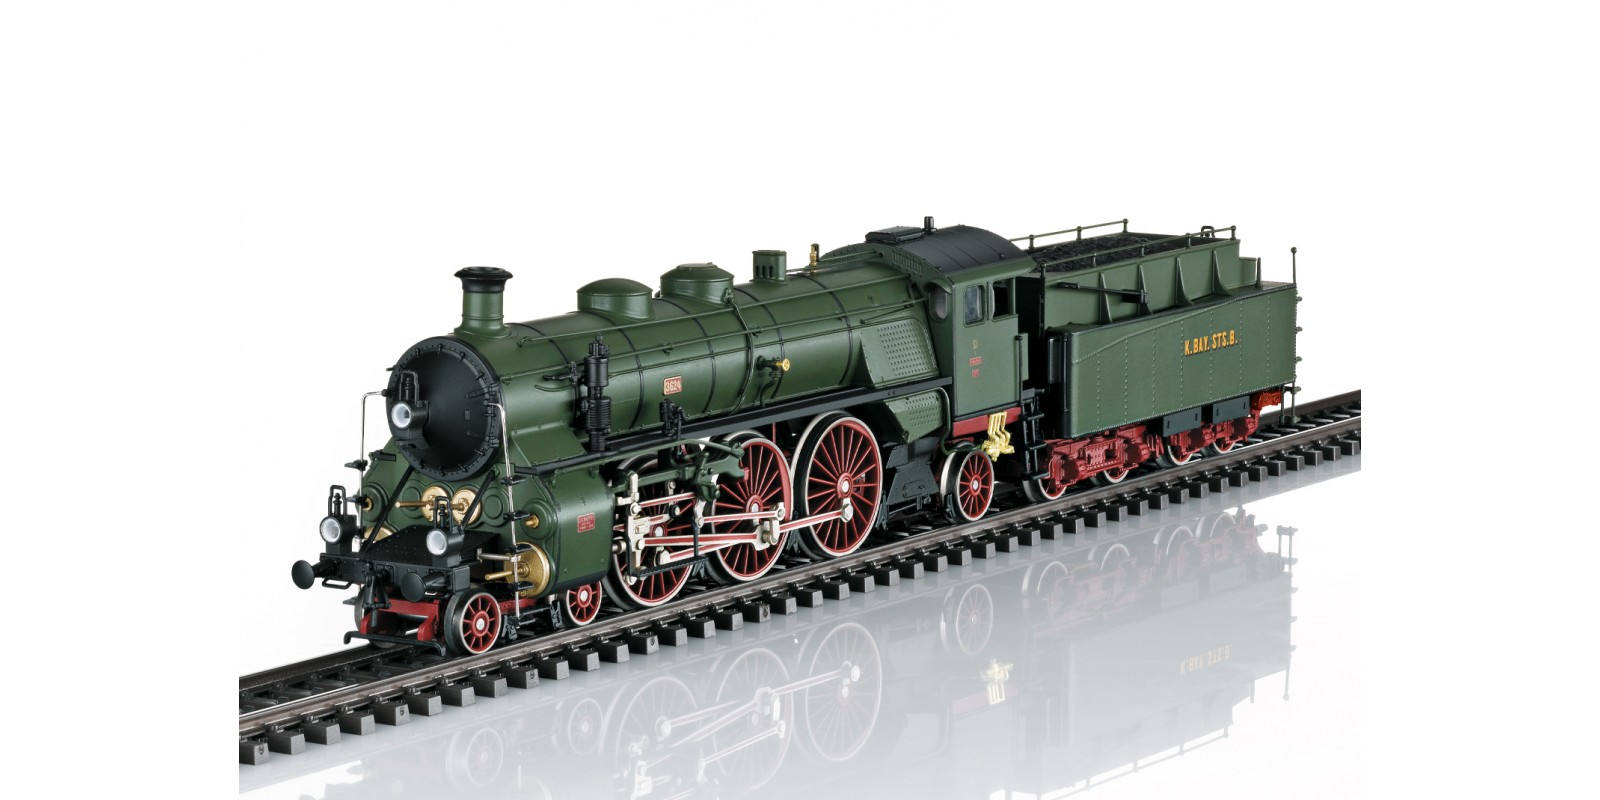 39436 Class S 3/6 Steam Locomotive, the "Hochhaxige" / "High Stepper"